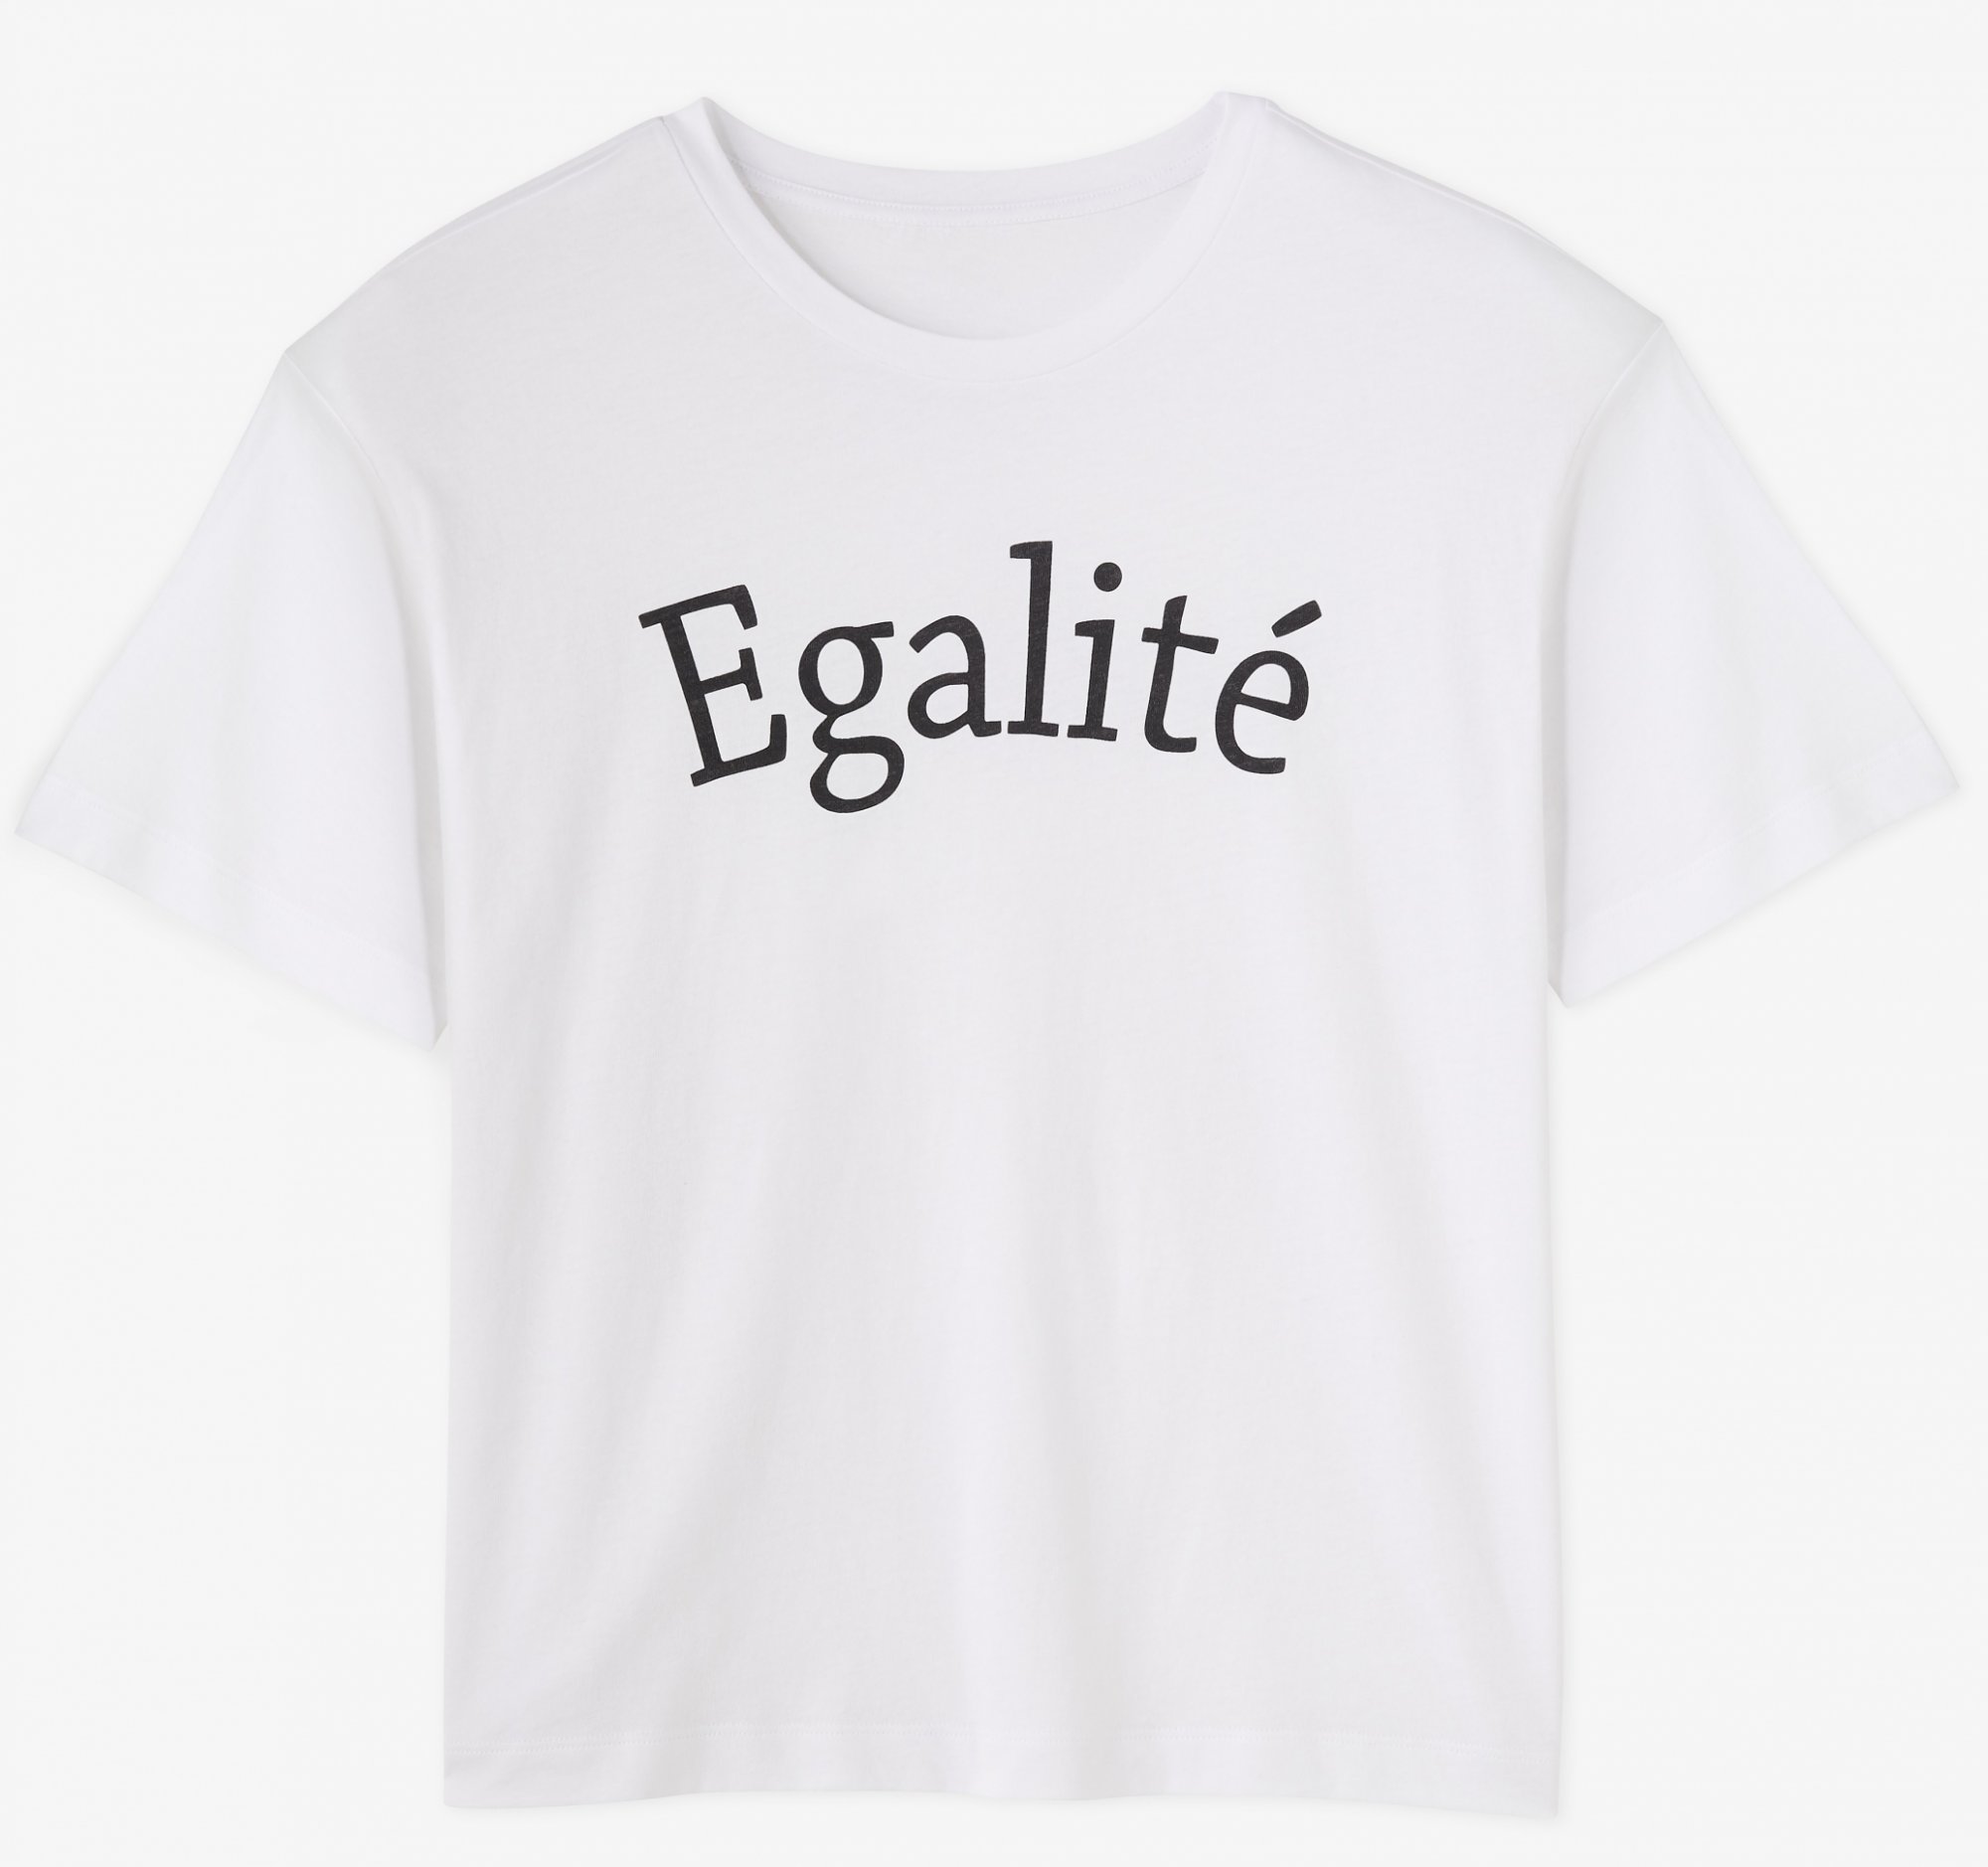 White T-shirt with inscription "Equality"